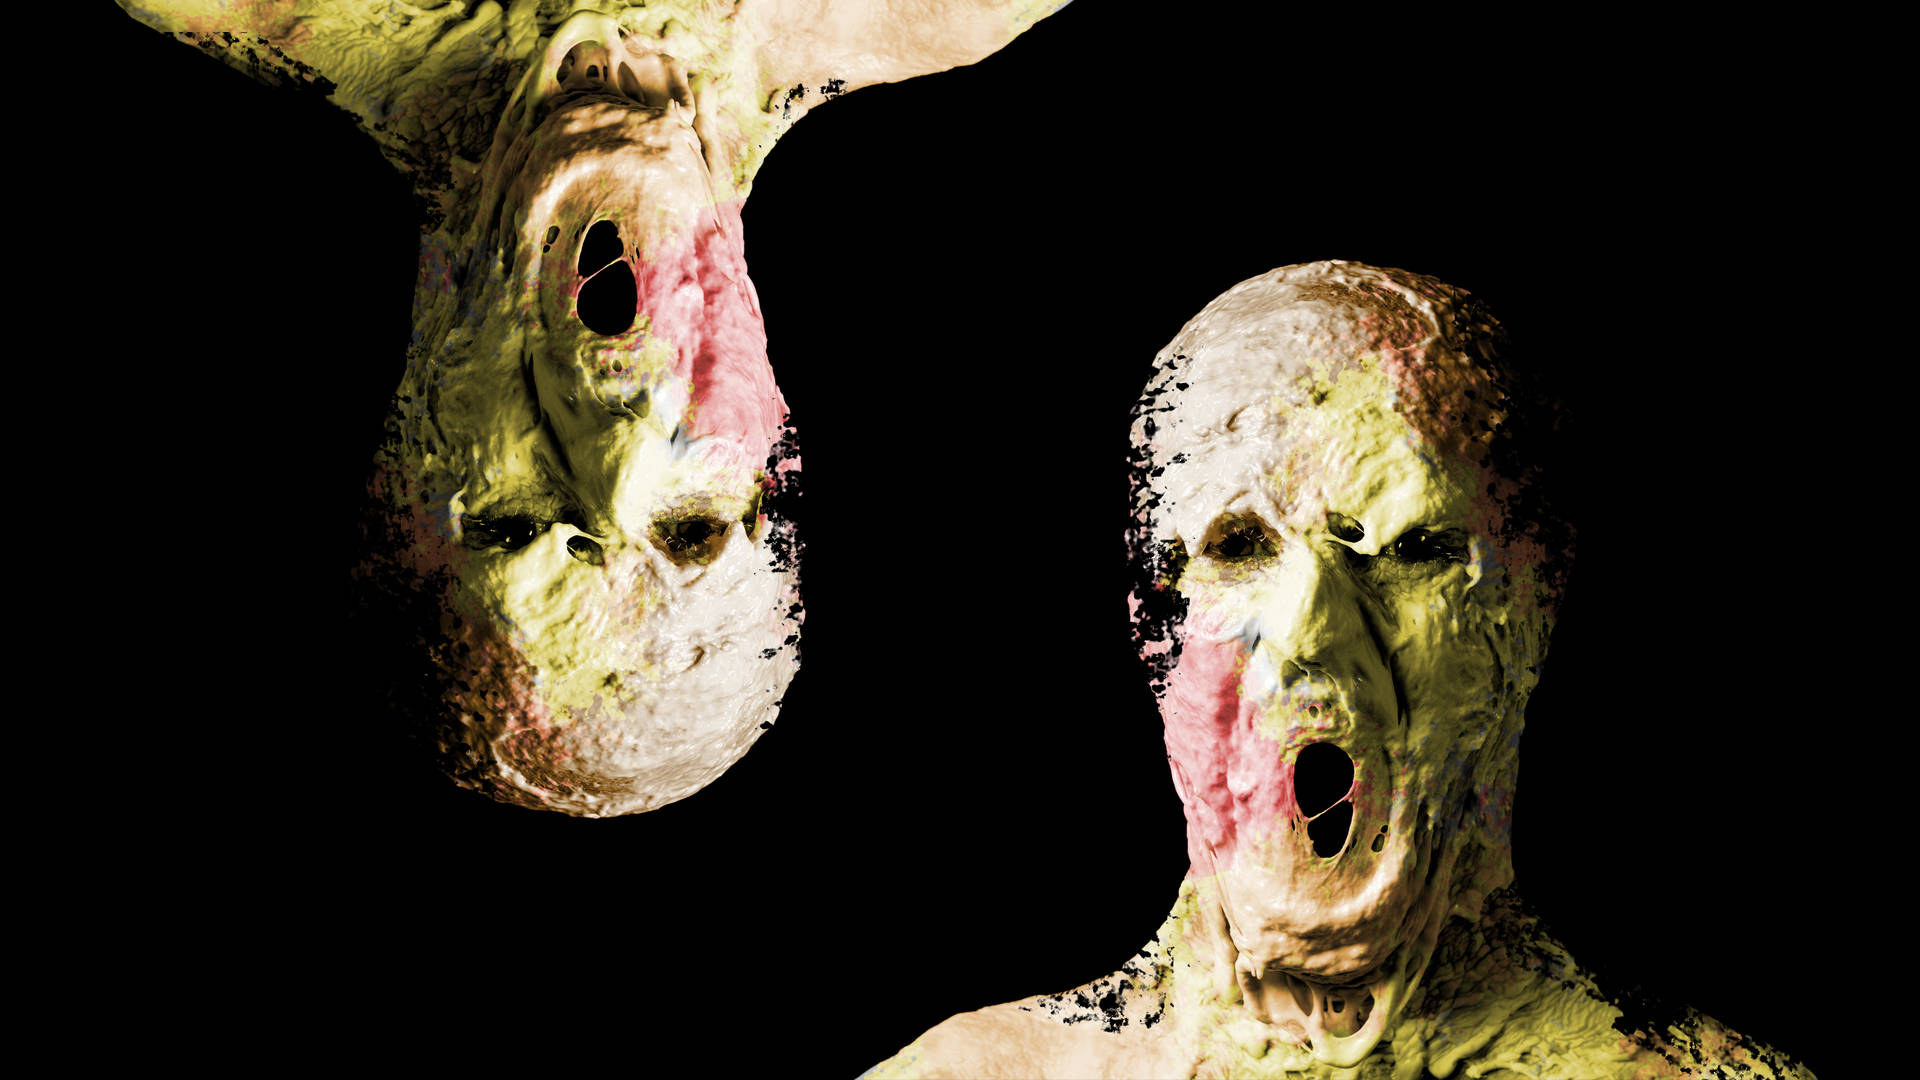 Frightening Scream: Portrait of a Repelling Face Wallpaper